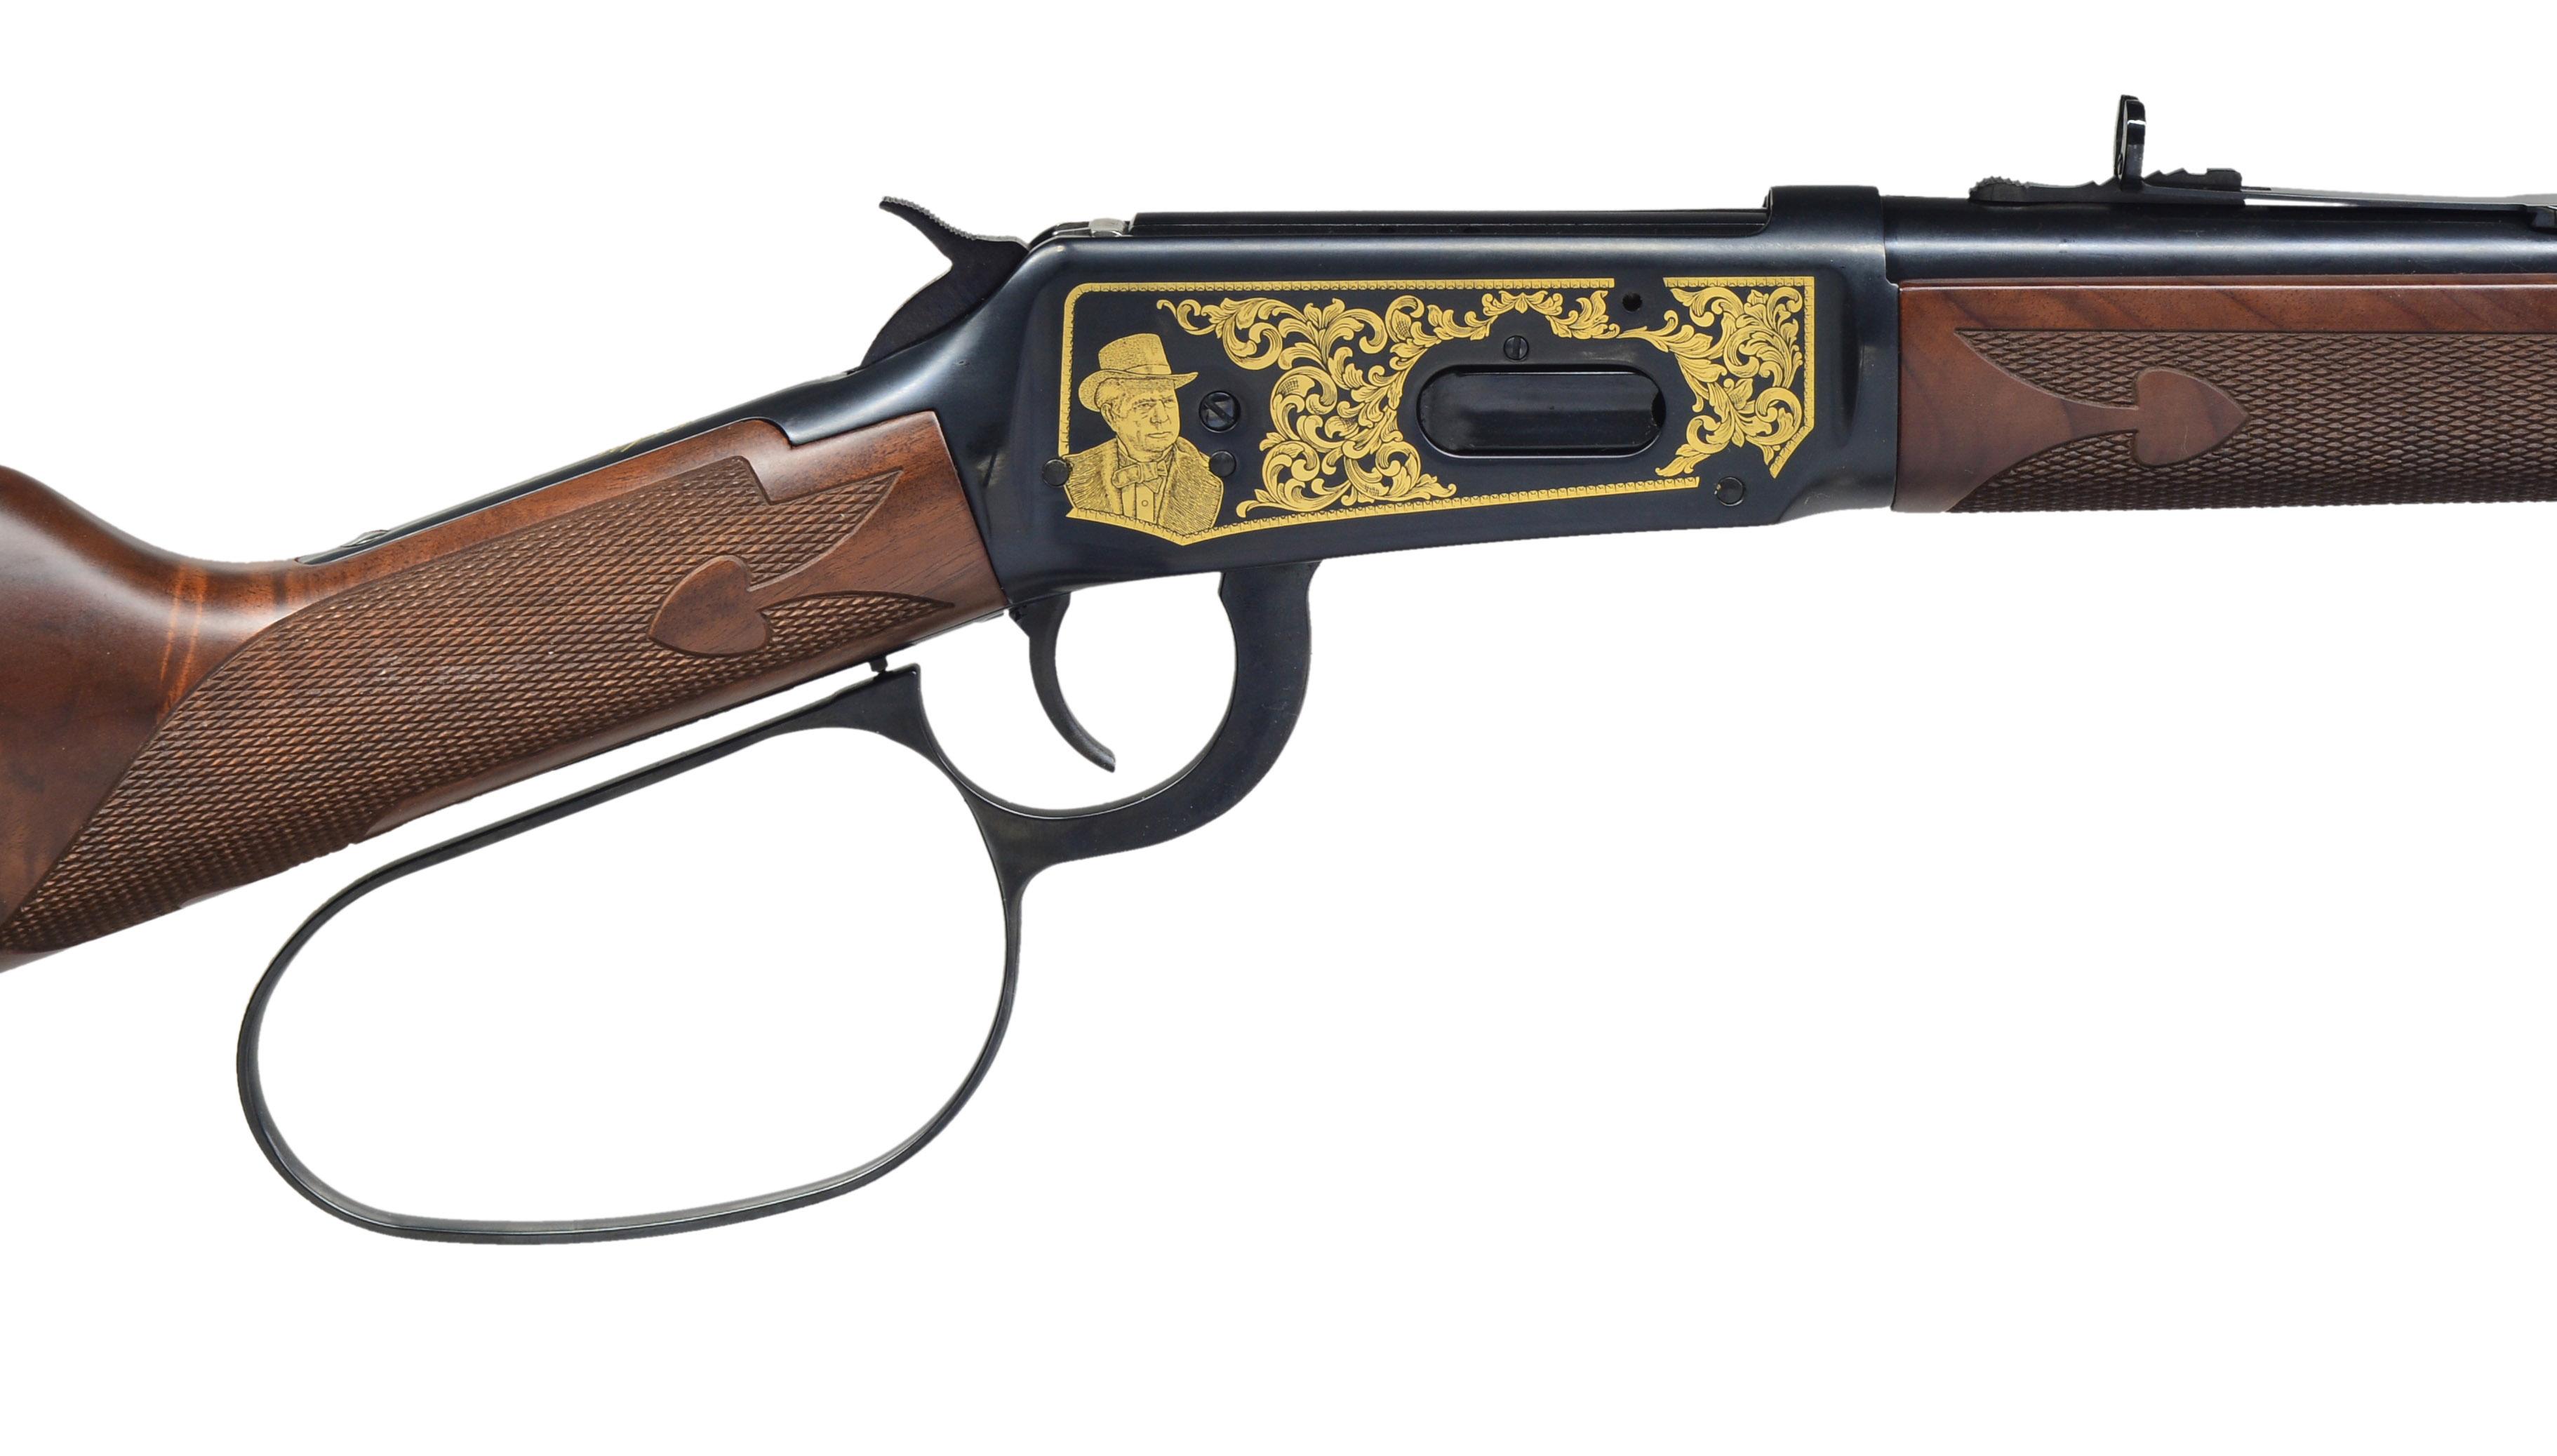 WINCHESTER 94 120TH ANNIVERSARY LEVER ACTION